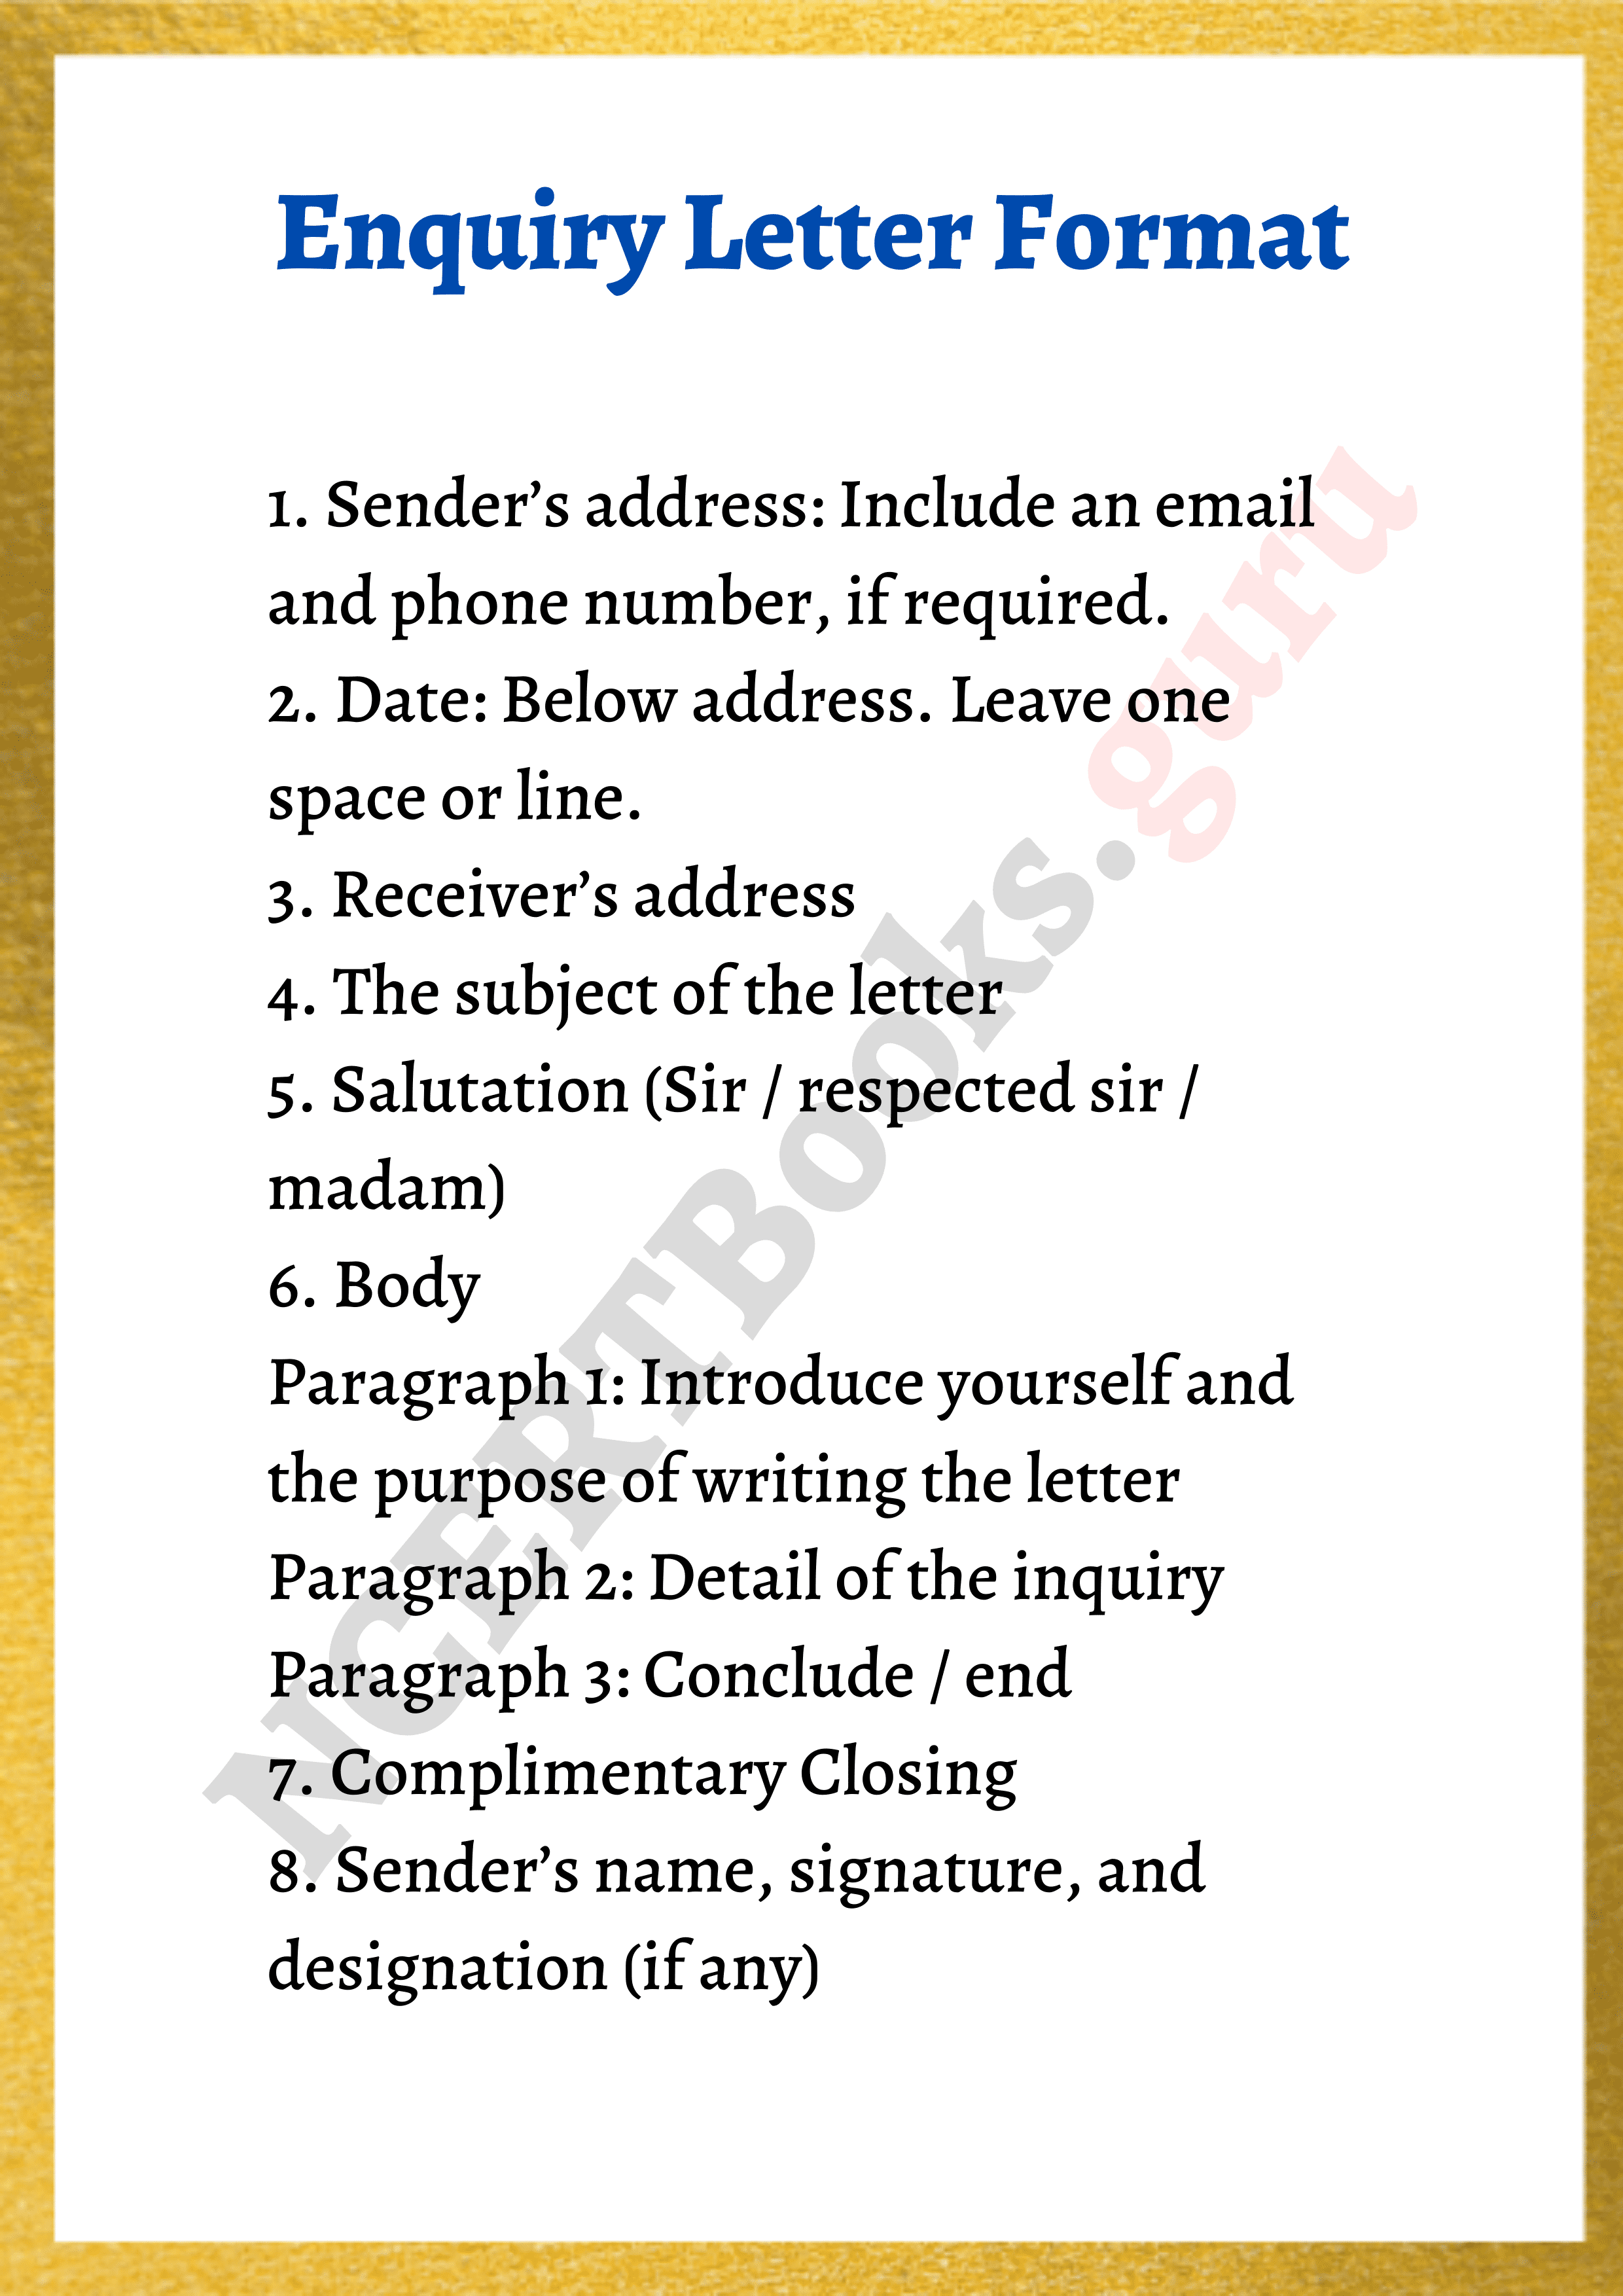 Enquiry Letter Writing Format, Samples  How to write an Enquiry